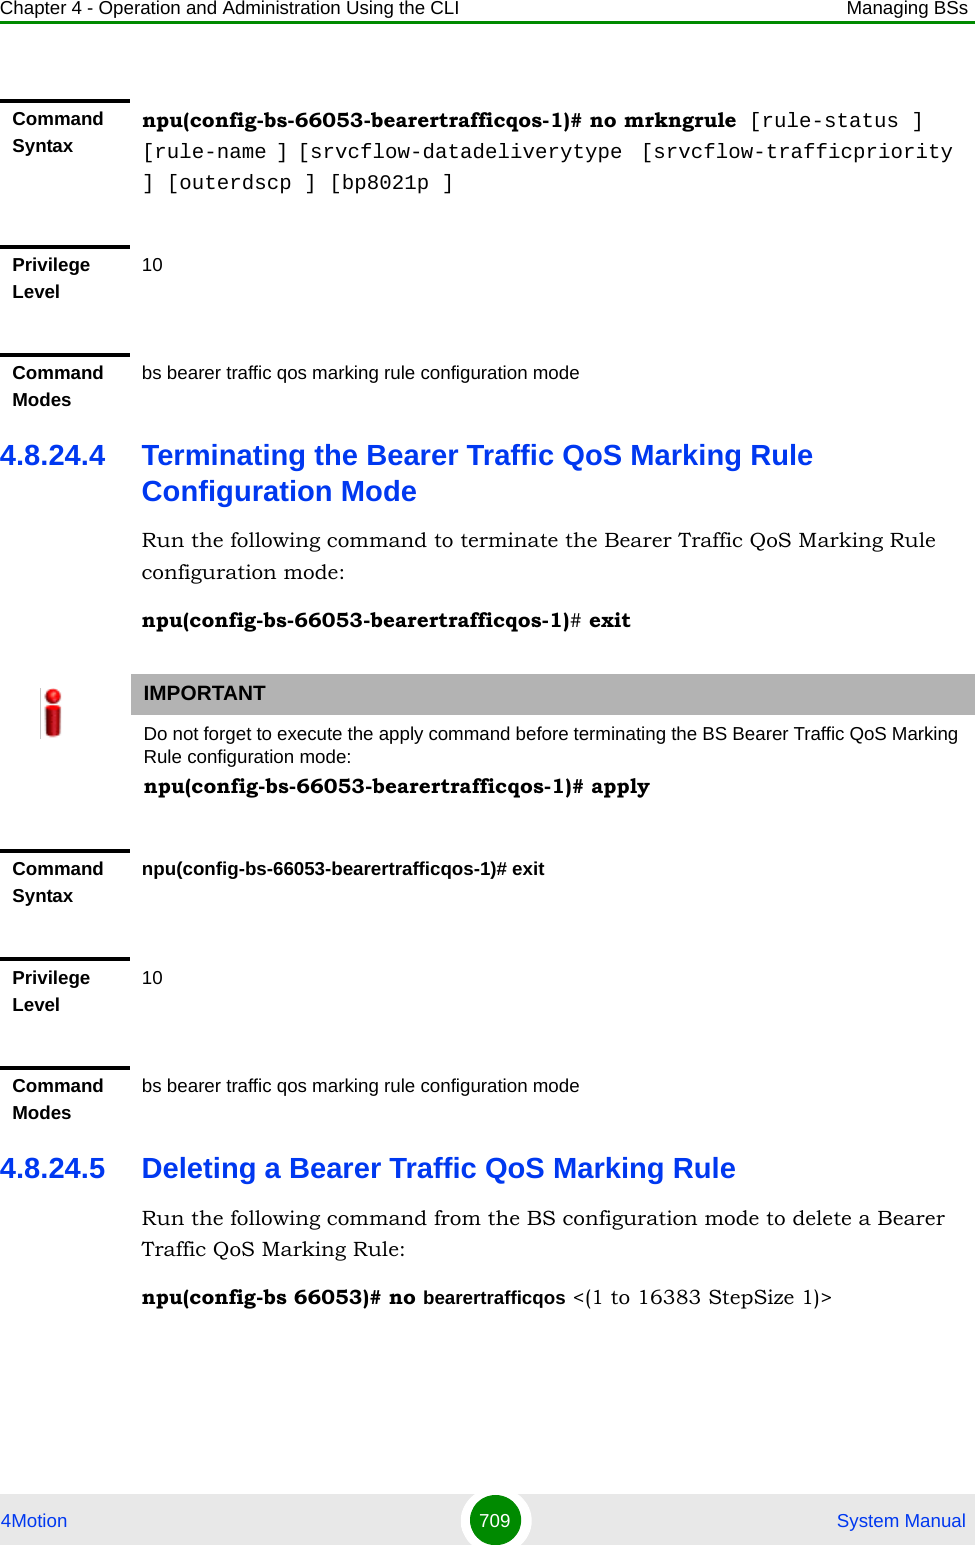 Chapter 4 - Operation and Administration Using the CLI Managing BSs4Motion 709  System Manual4.8.24.4 Terminating the Bearer Traffic QoS Marking Rule Configuration ModeRun the following command to terminate the Bearer Traffic QoS Marking Rule configuration mode:npu(config-bs-66053-bearertrafficqos-1)# exit4.8.24.5 Deleting a Bearer Traffic QoS Marking RuleRun the following command from the BS configuration mode to delete a Bearer Traffic QoS Marking Rule:npu(config-bs 66053)# no bearertrafficqos &lt;(1 to 16383 StepSize 1)&gt; Command Syntaxnpu(config-bs-66053-bearertrafficqos-1)# no mrkngrule [rule-status ] [rule-name ] [srvcflow-datadeliverytype  [srvcflow-trafficpriority ] [outerdscp ] [bp8021p ]Privilege Level10Command Modesbs bearer traffic qos marking rule configuration modeIMPORTANTDo not forget to execute the apply command before terminating the BS Bearer Traffic QoS Marking Rule configuration mode:npu(config-bs-66053-bearertrafficqos-1)# applyCommand Syntaxnpu(config-bs-66053-bearertrafficqos-1)# exitPrivilege Level10Command Modesbs bearer traffic qos marking rule configuration mode